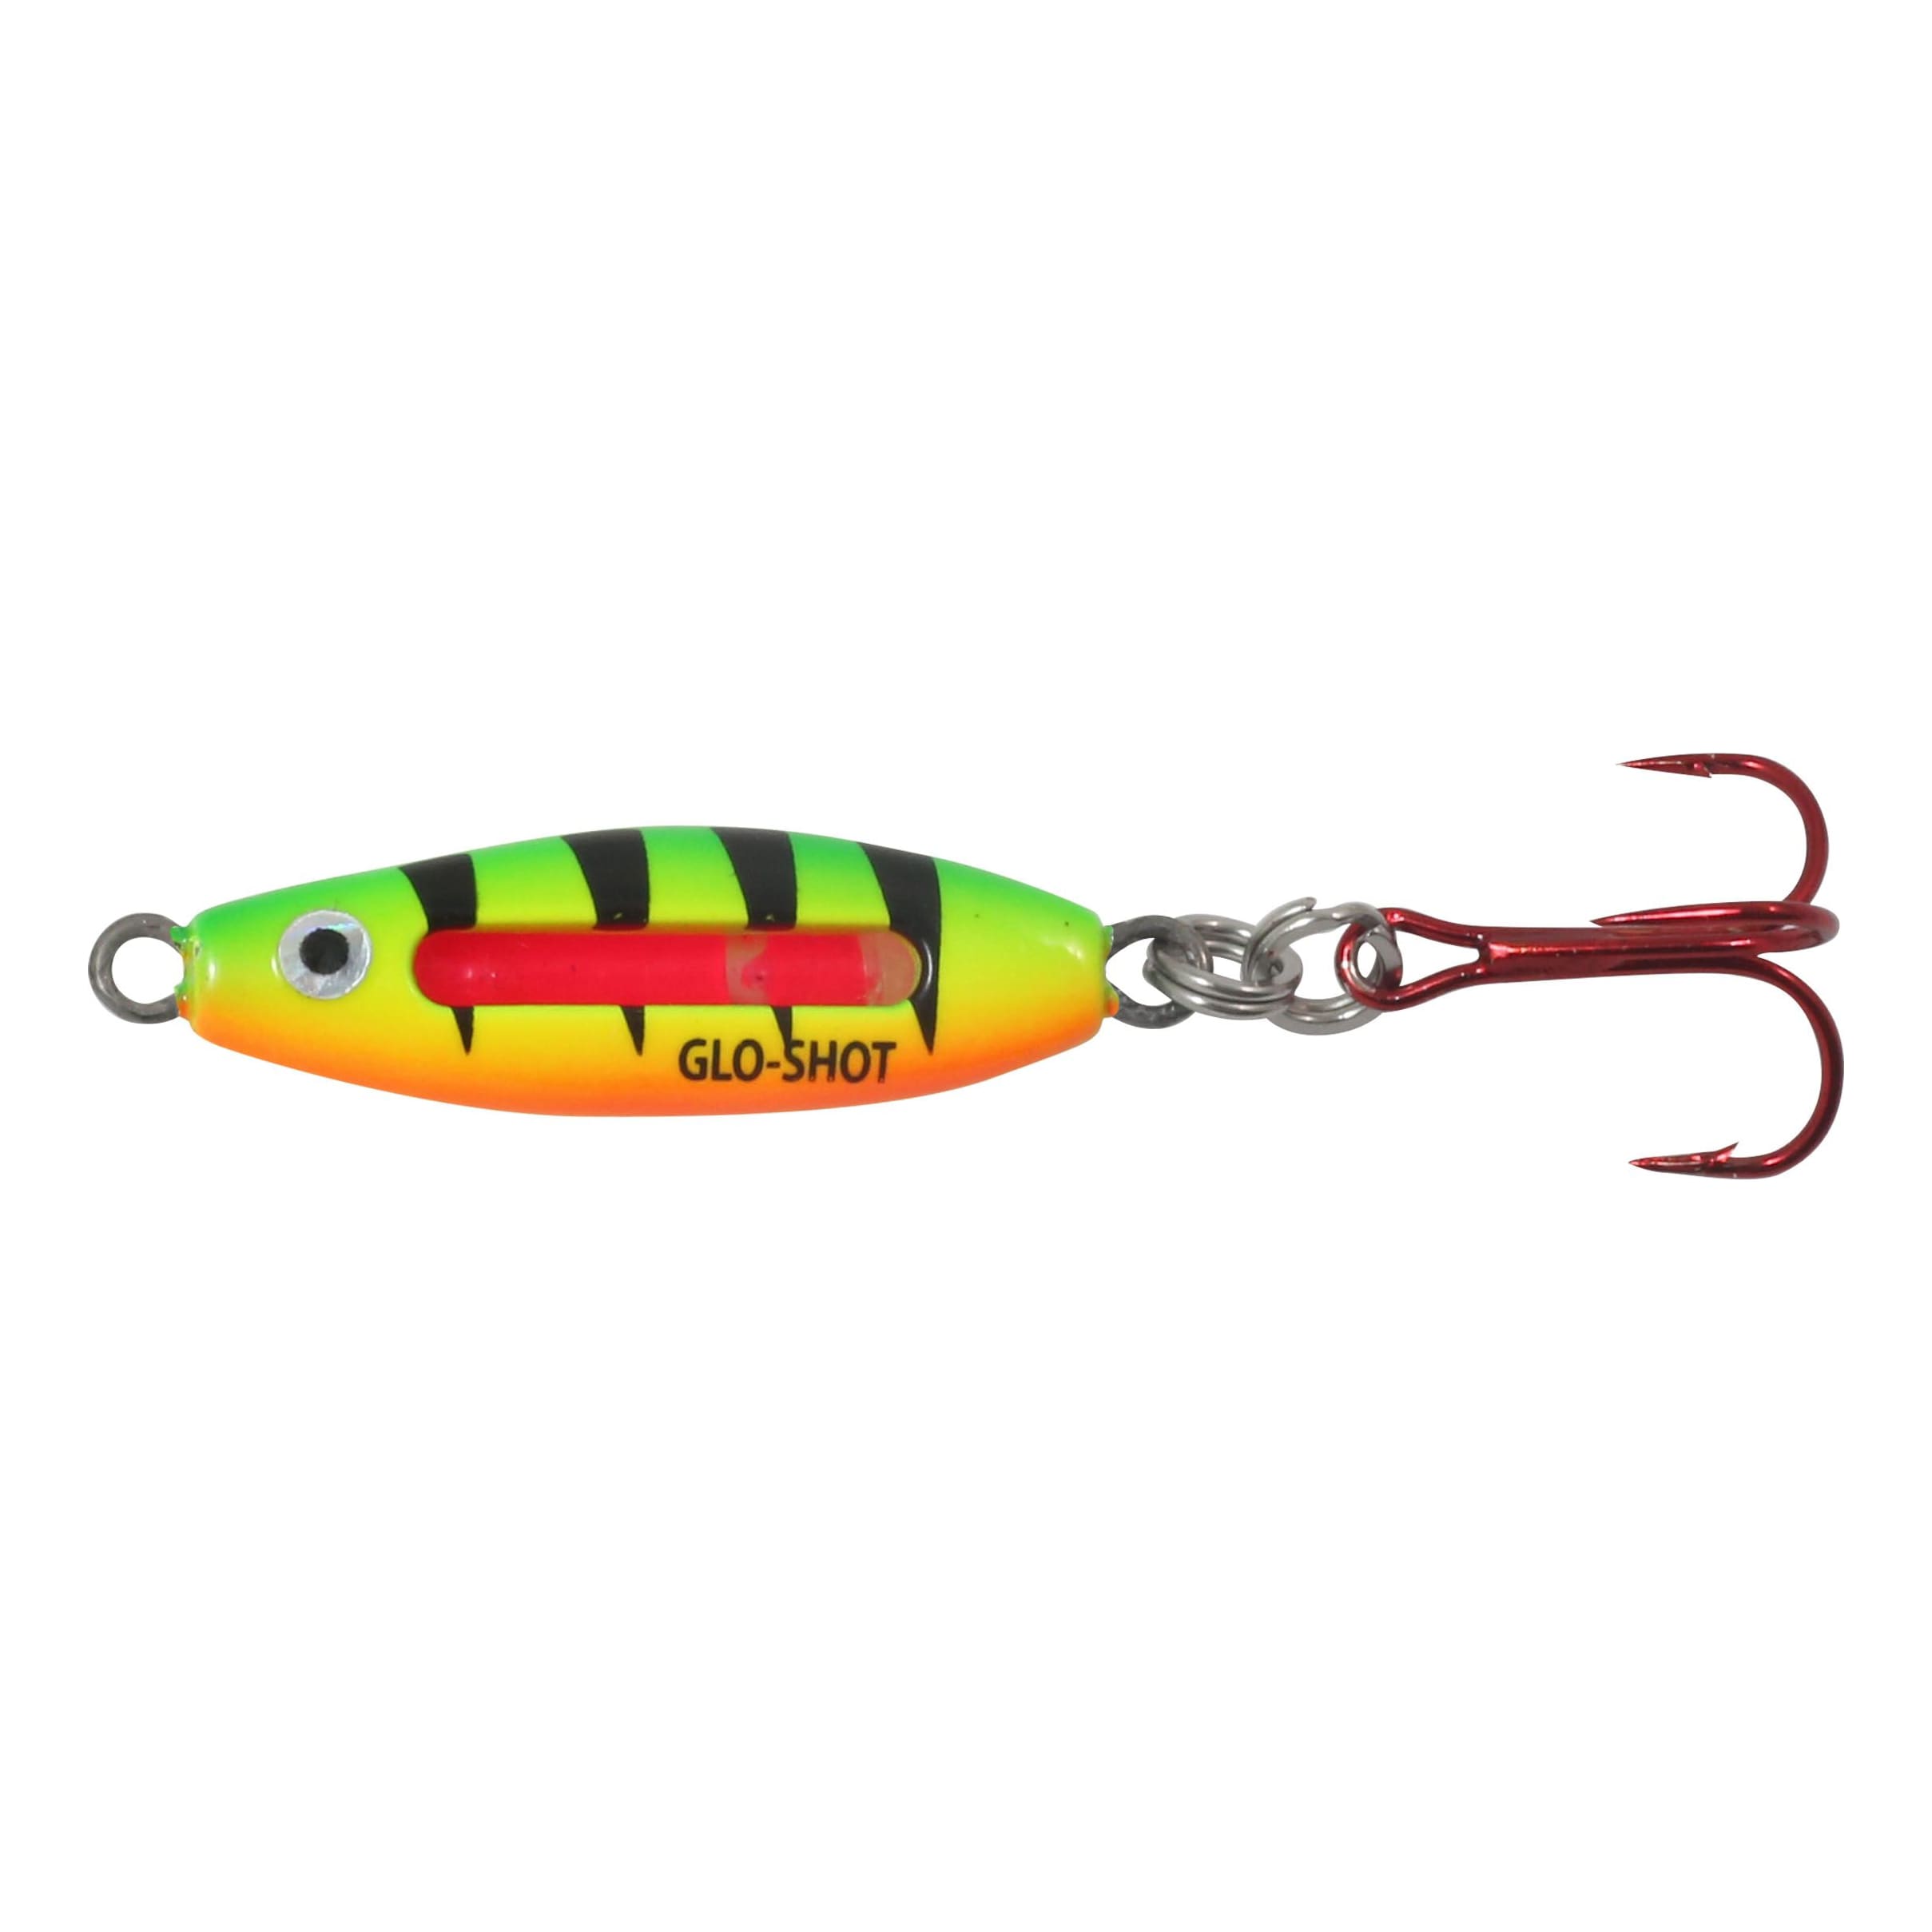 PK Lures Rattle Spoon